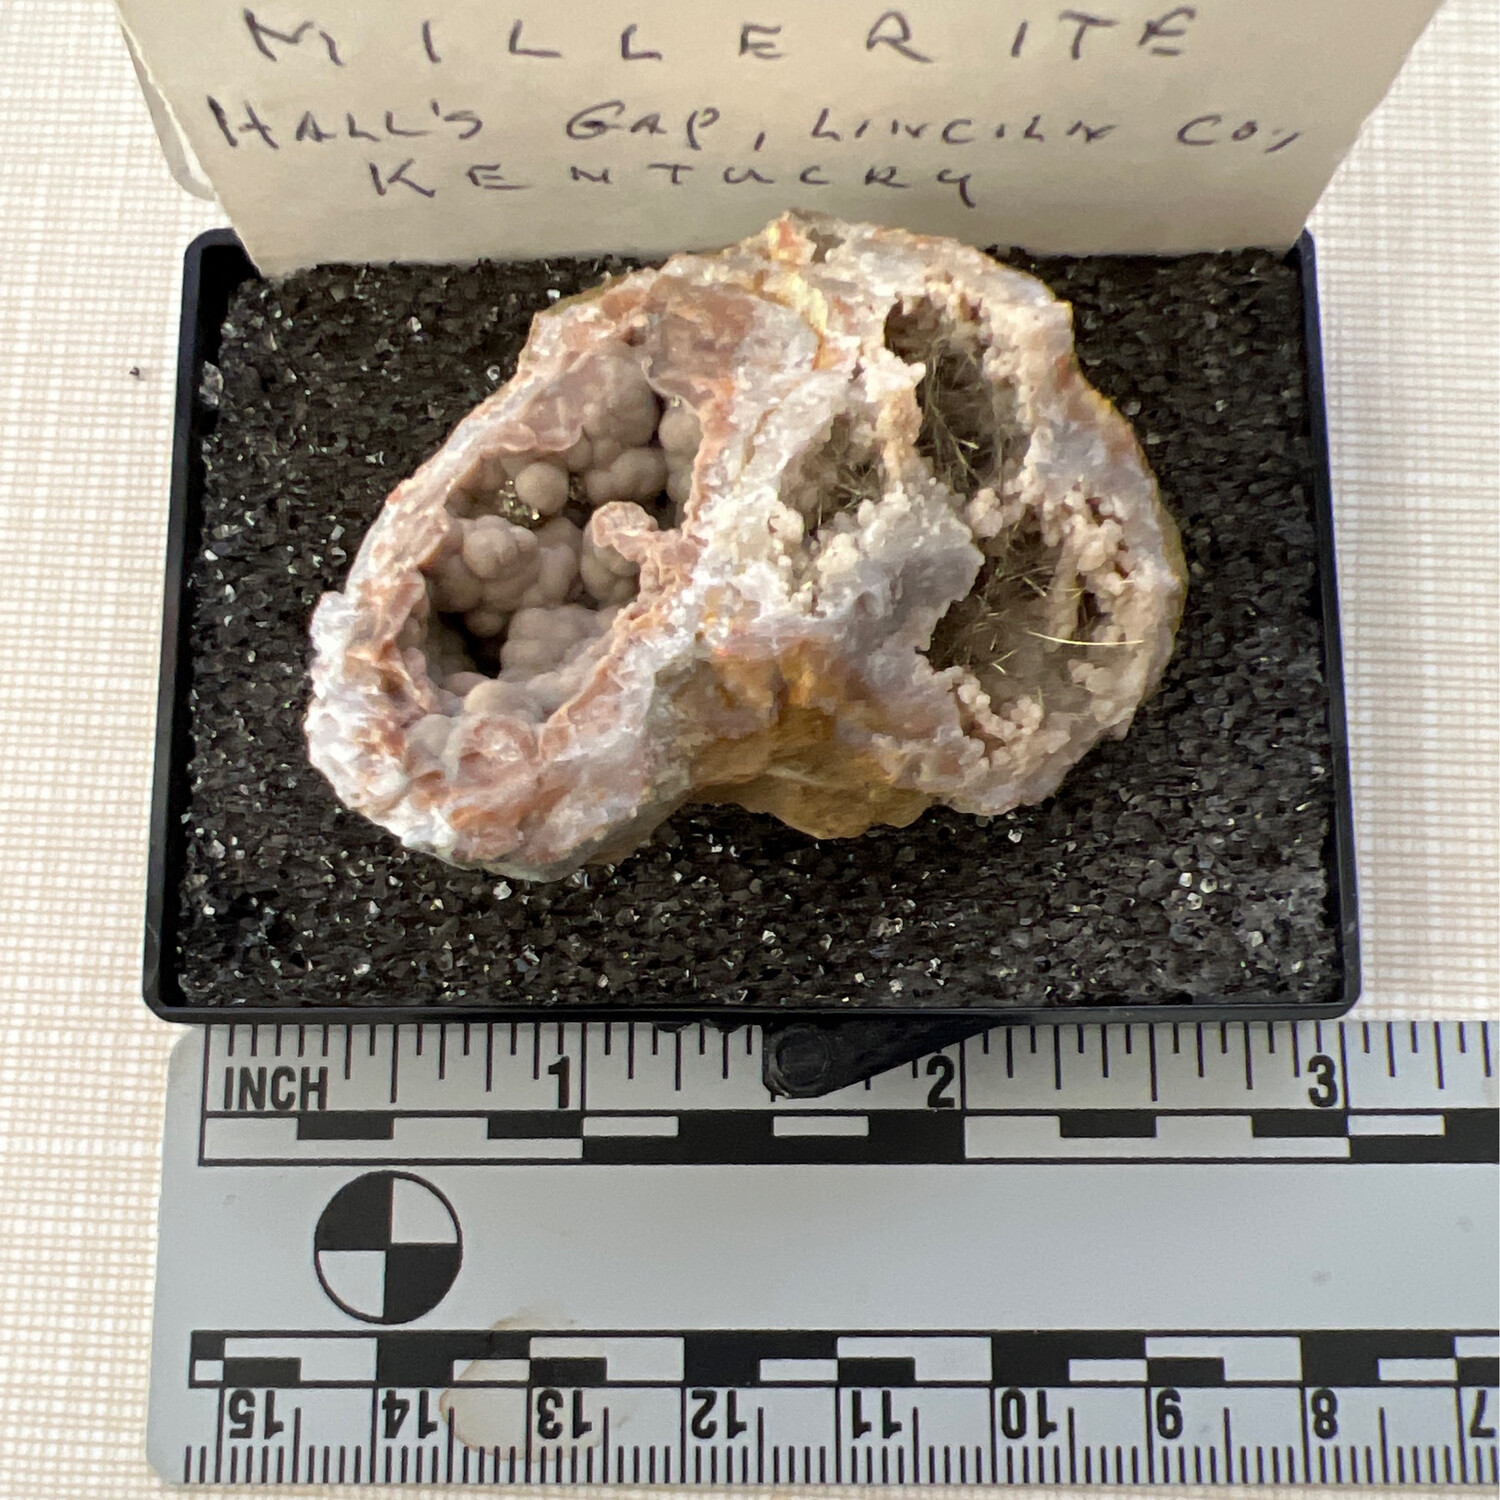 Millerite, Hall's Gap, Lincoln County, Kentucky